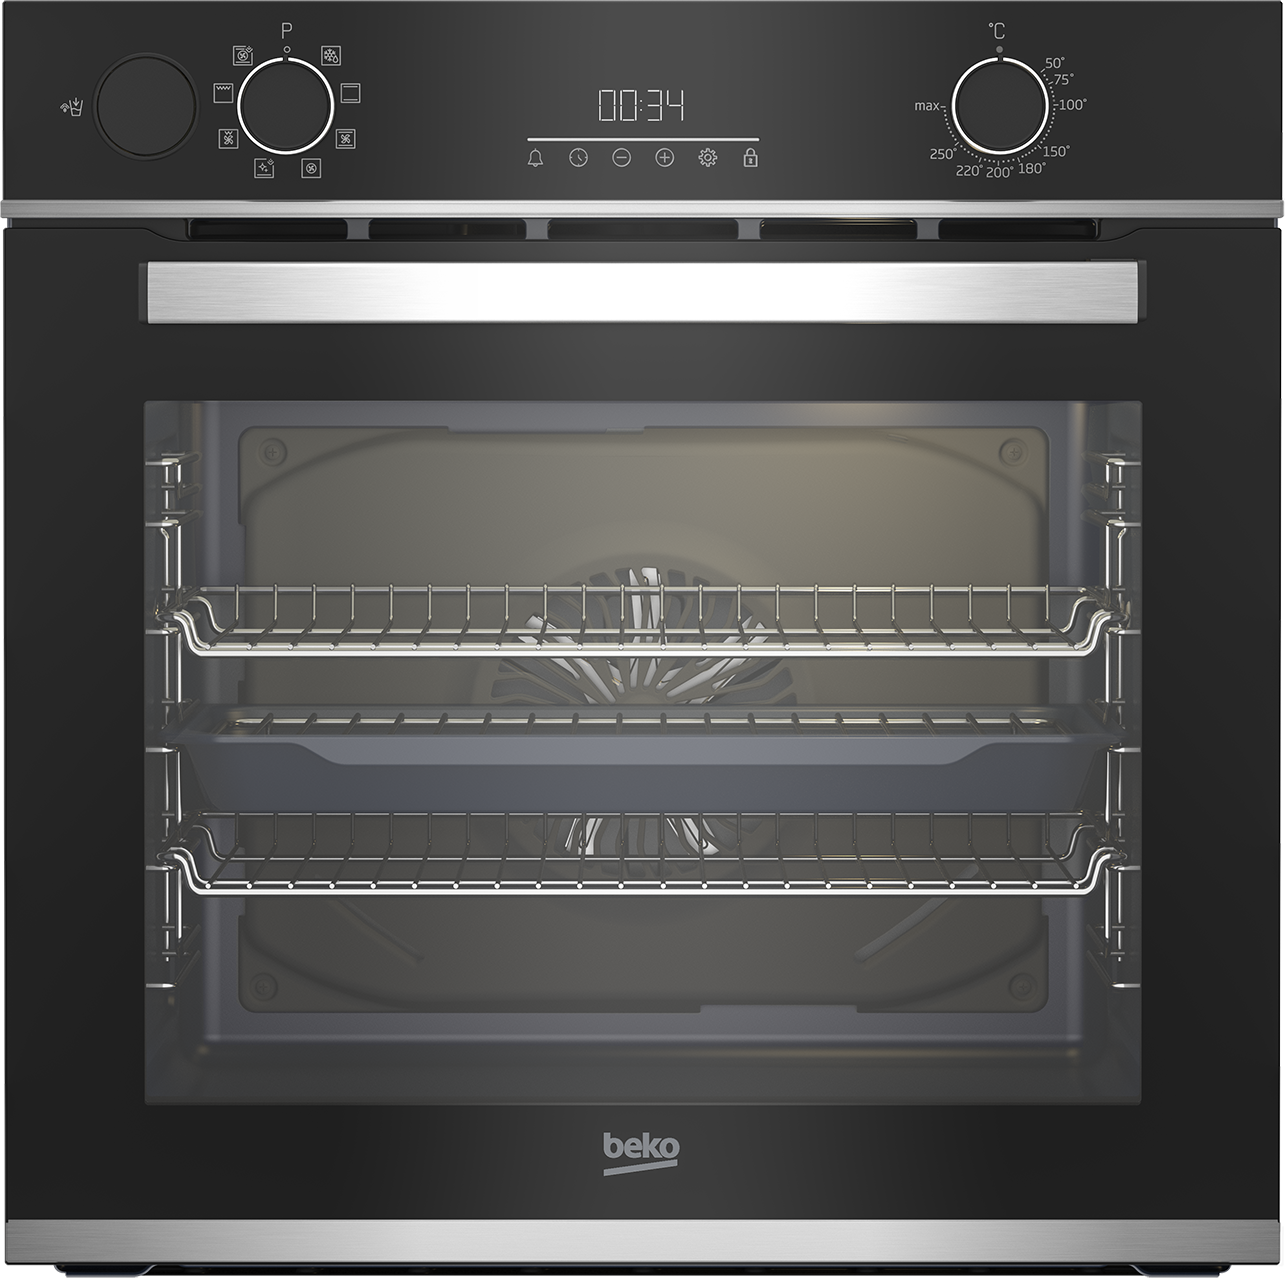 Beko AeroPerfect RecycledNet BBIS25300XC Built In Electric Single Oven - Stainless Steel - A Rated, Stainless Steel